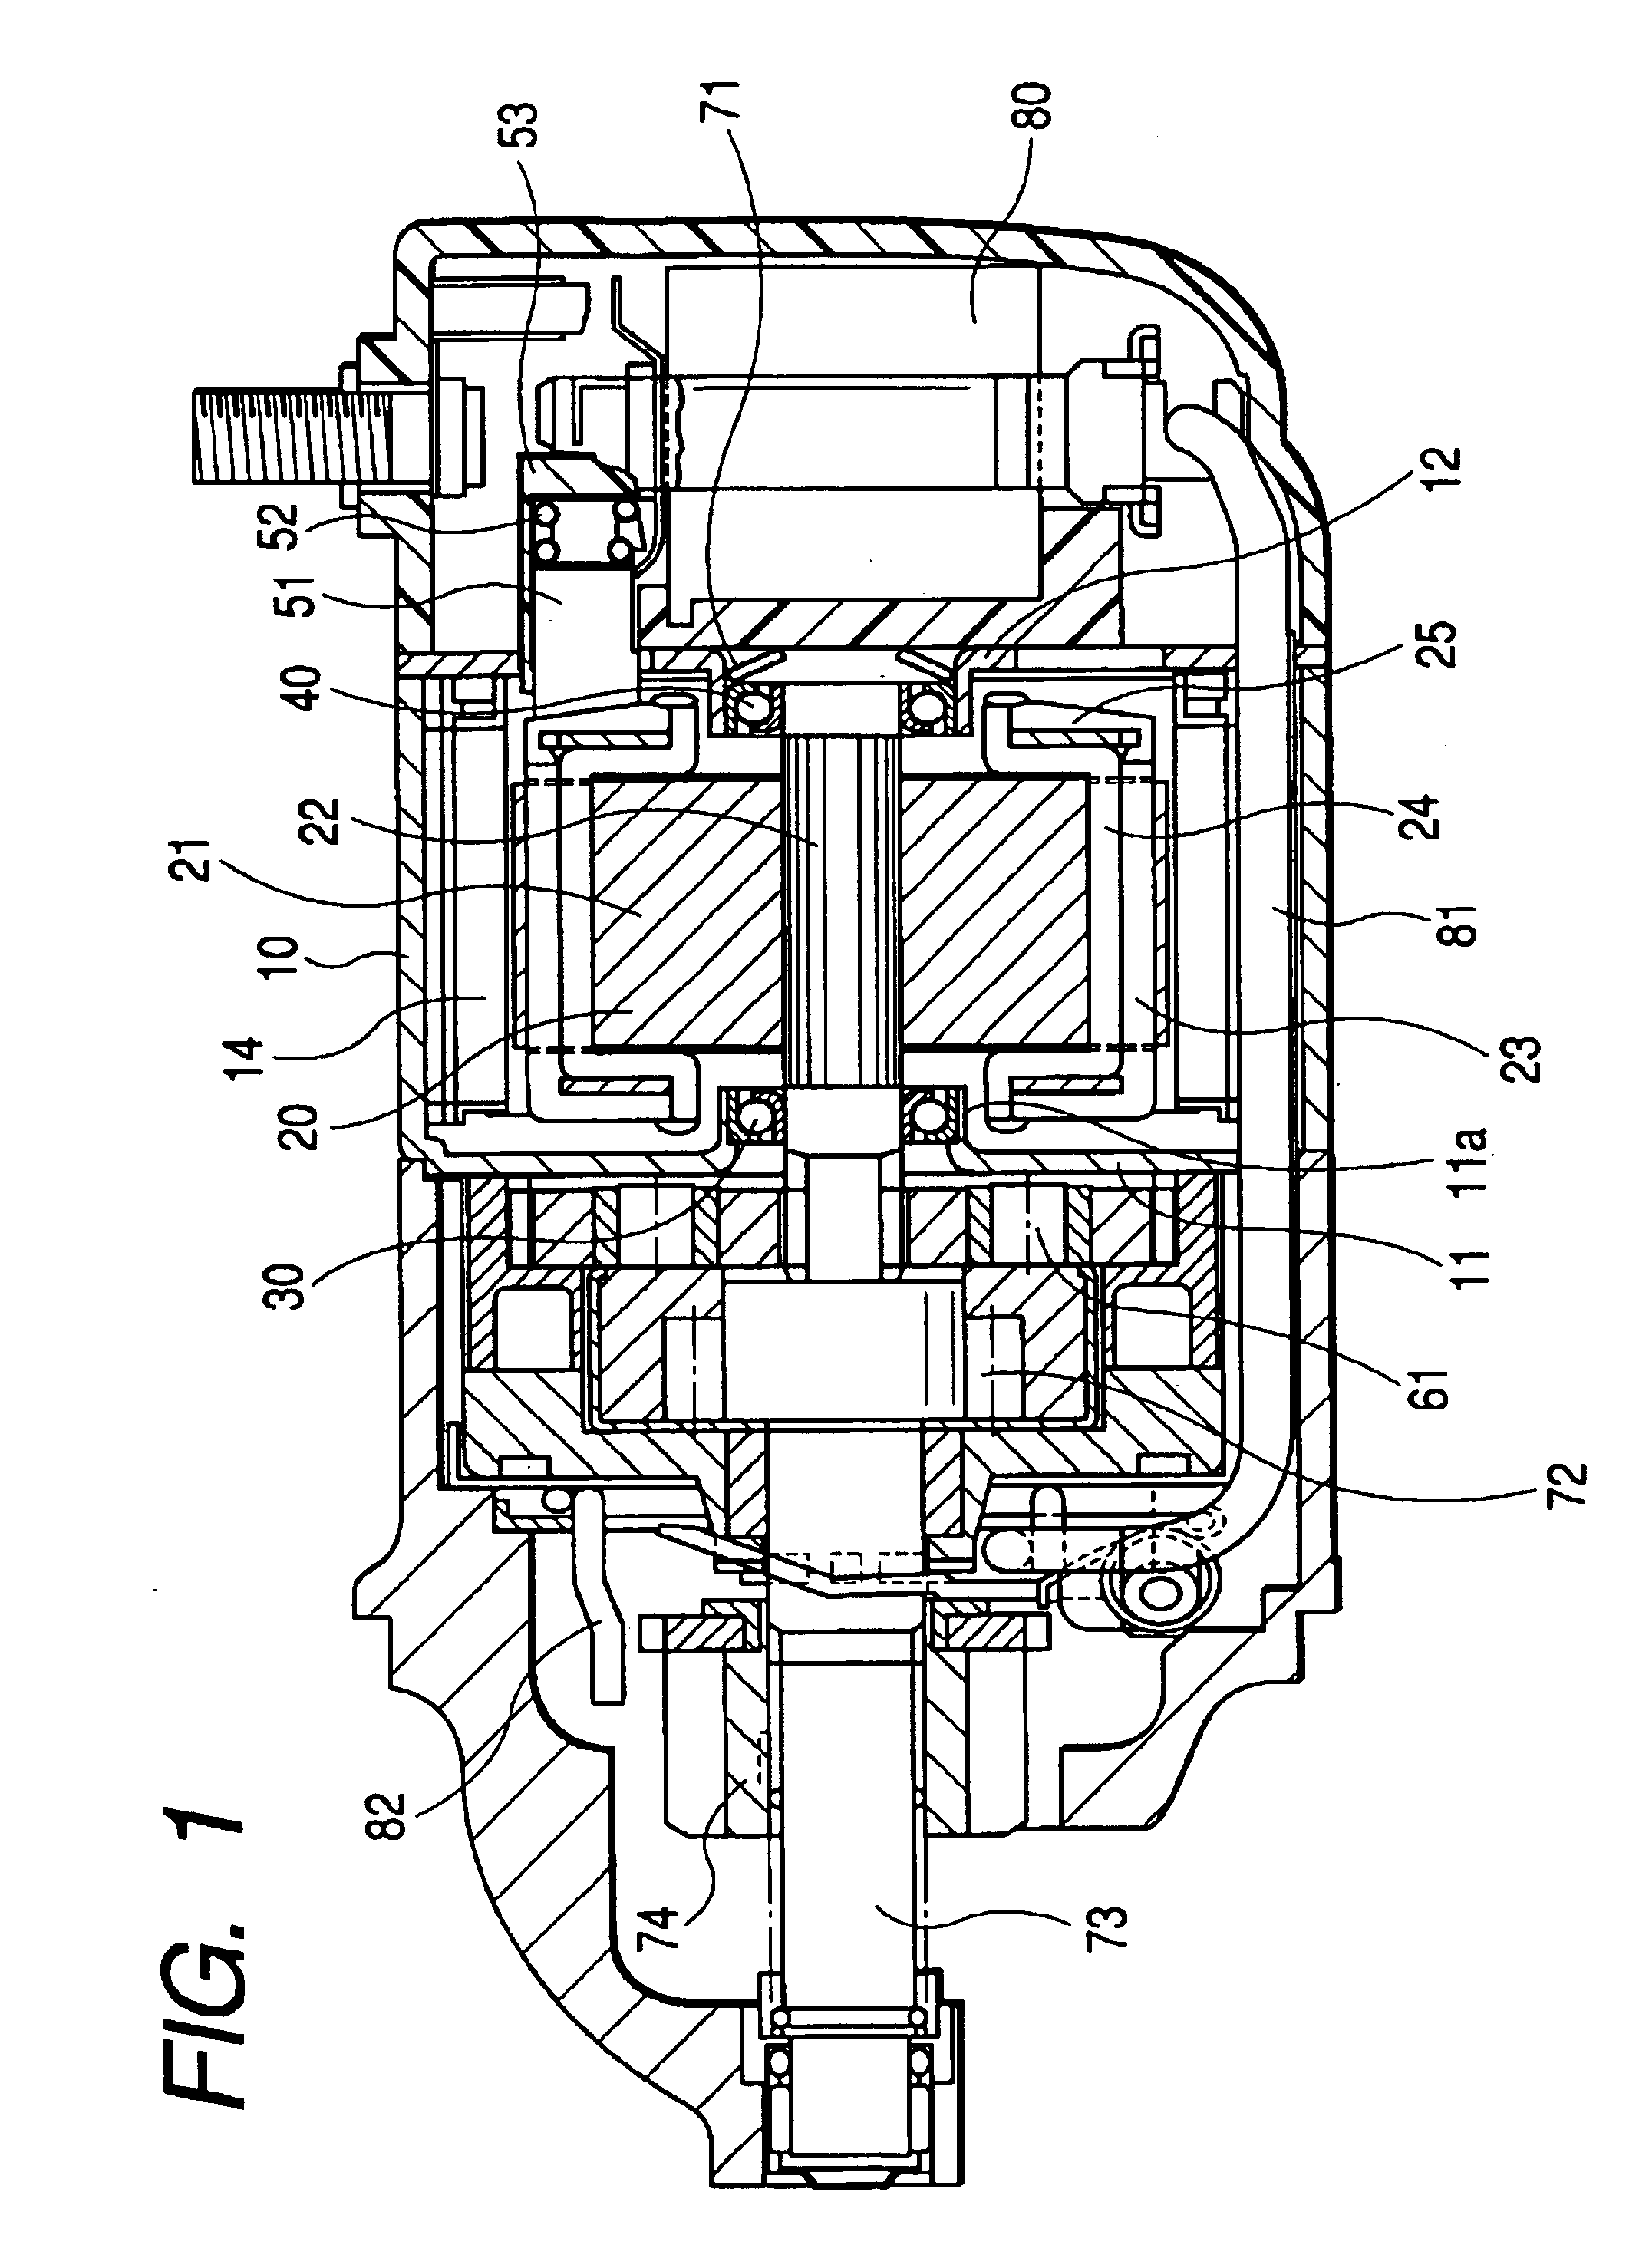 Armature support structure of starter for automotive engine